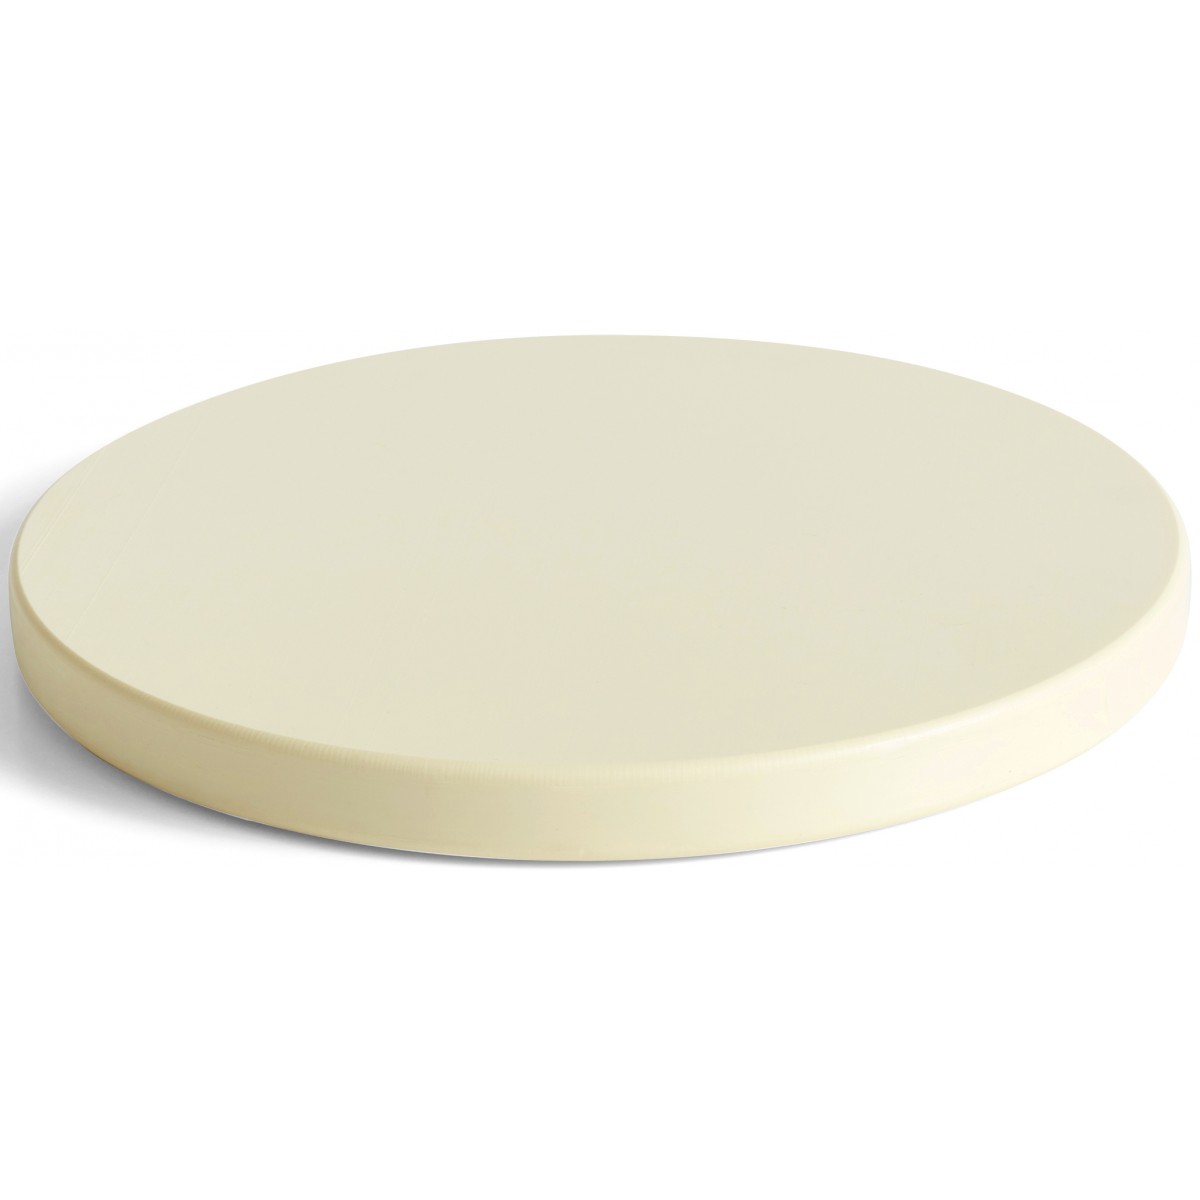 off white - round chopping board